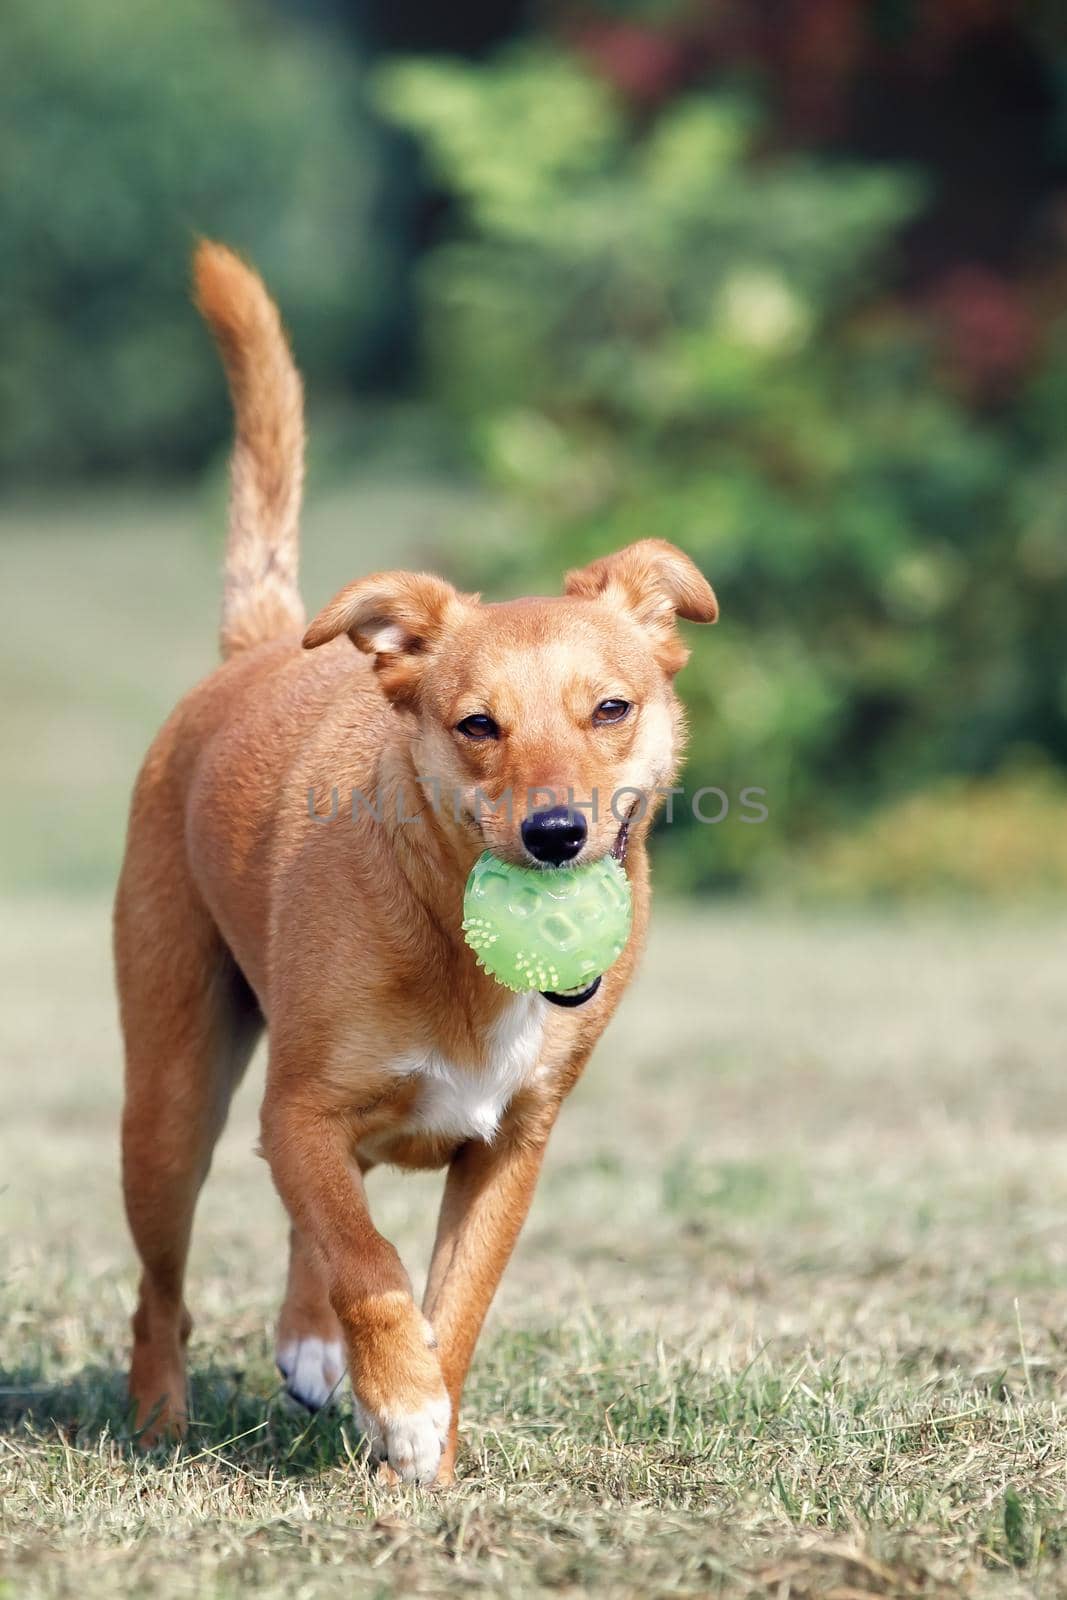 The brown dog ran with a raised tail and brought the green ball by Lincikas